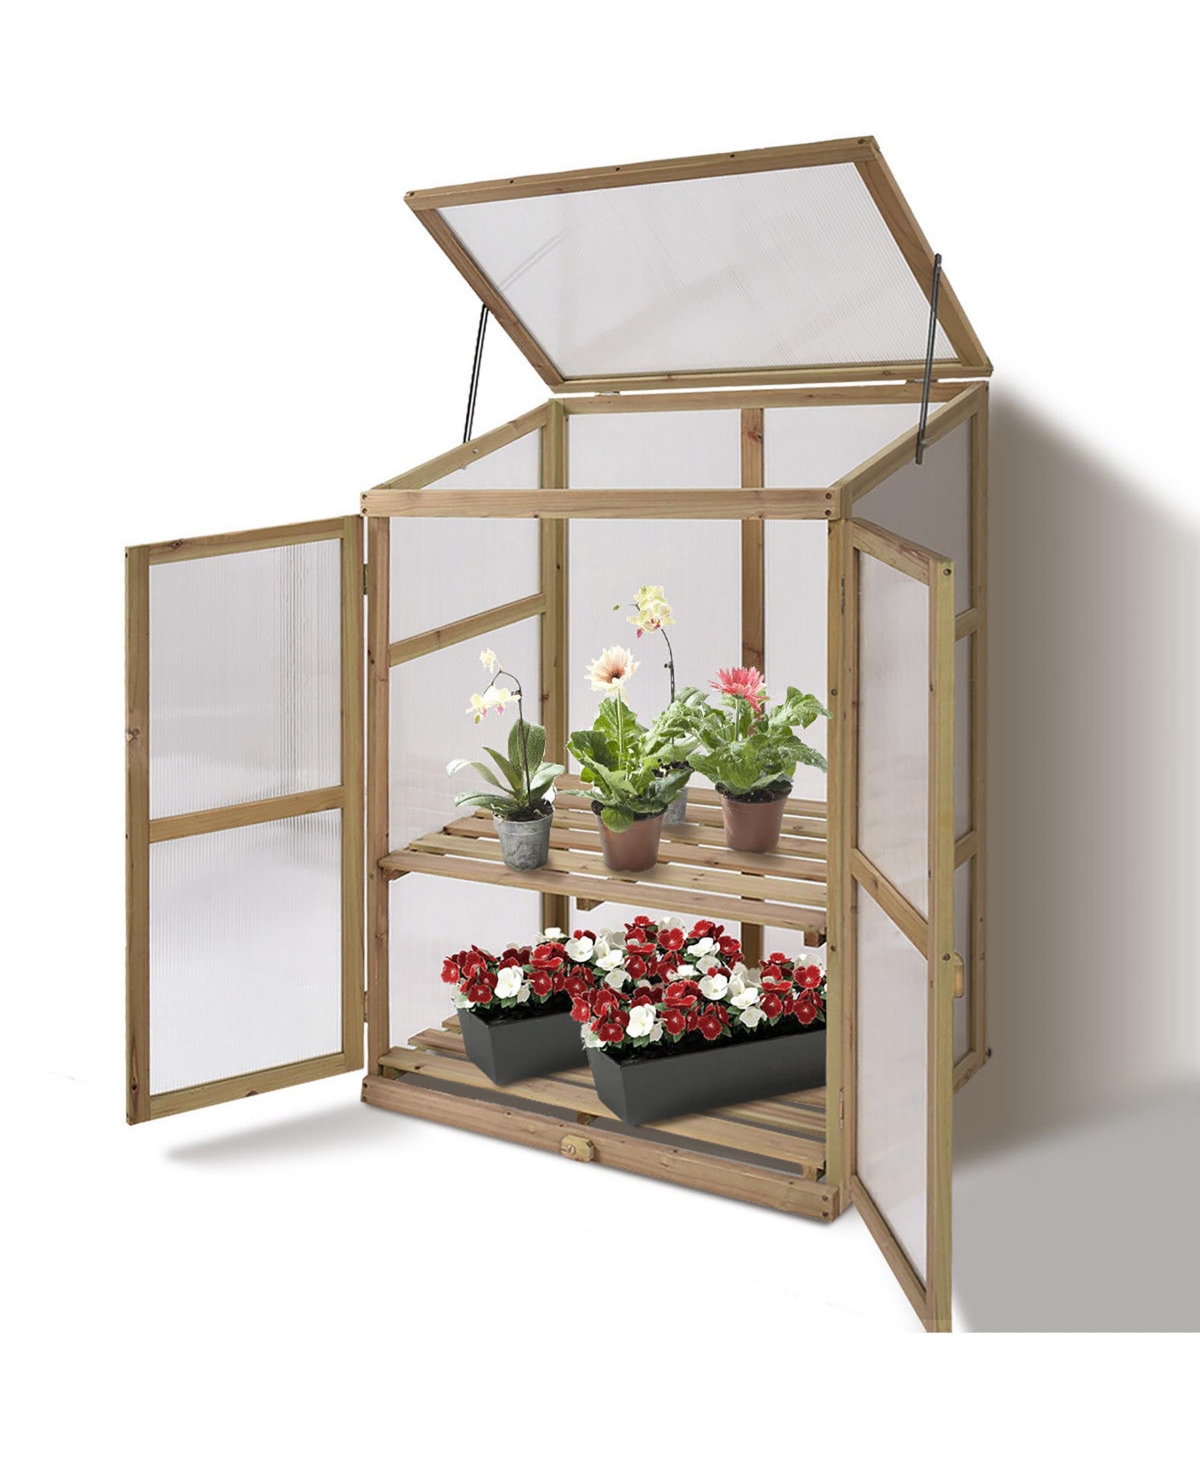 Garden Portable Wooden GreenHouse Cold Frame Raised Plants Shelves Protection - Natural